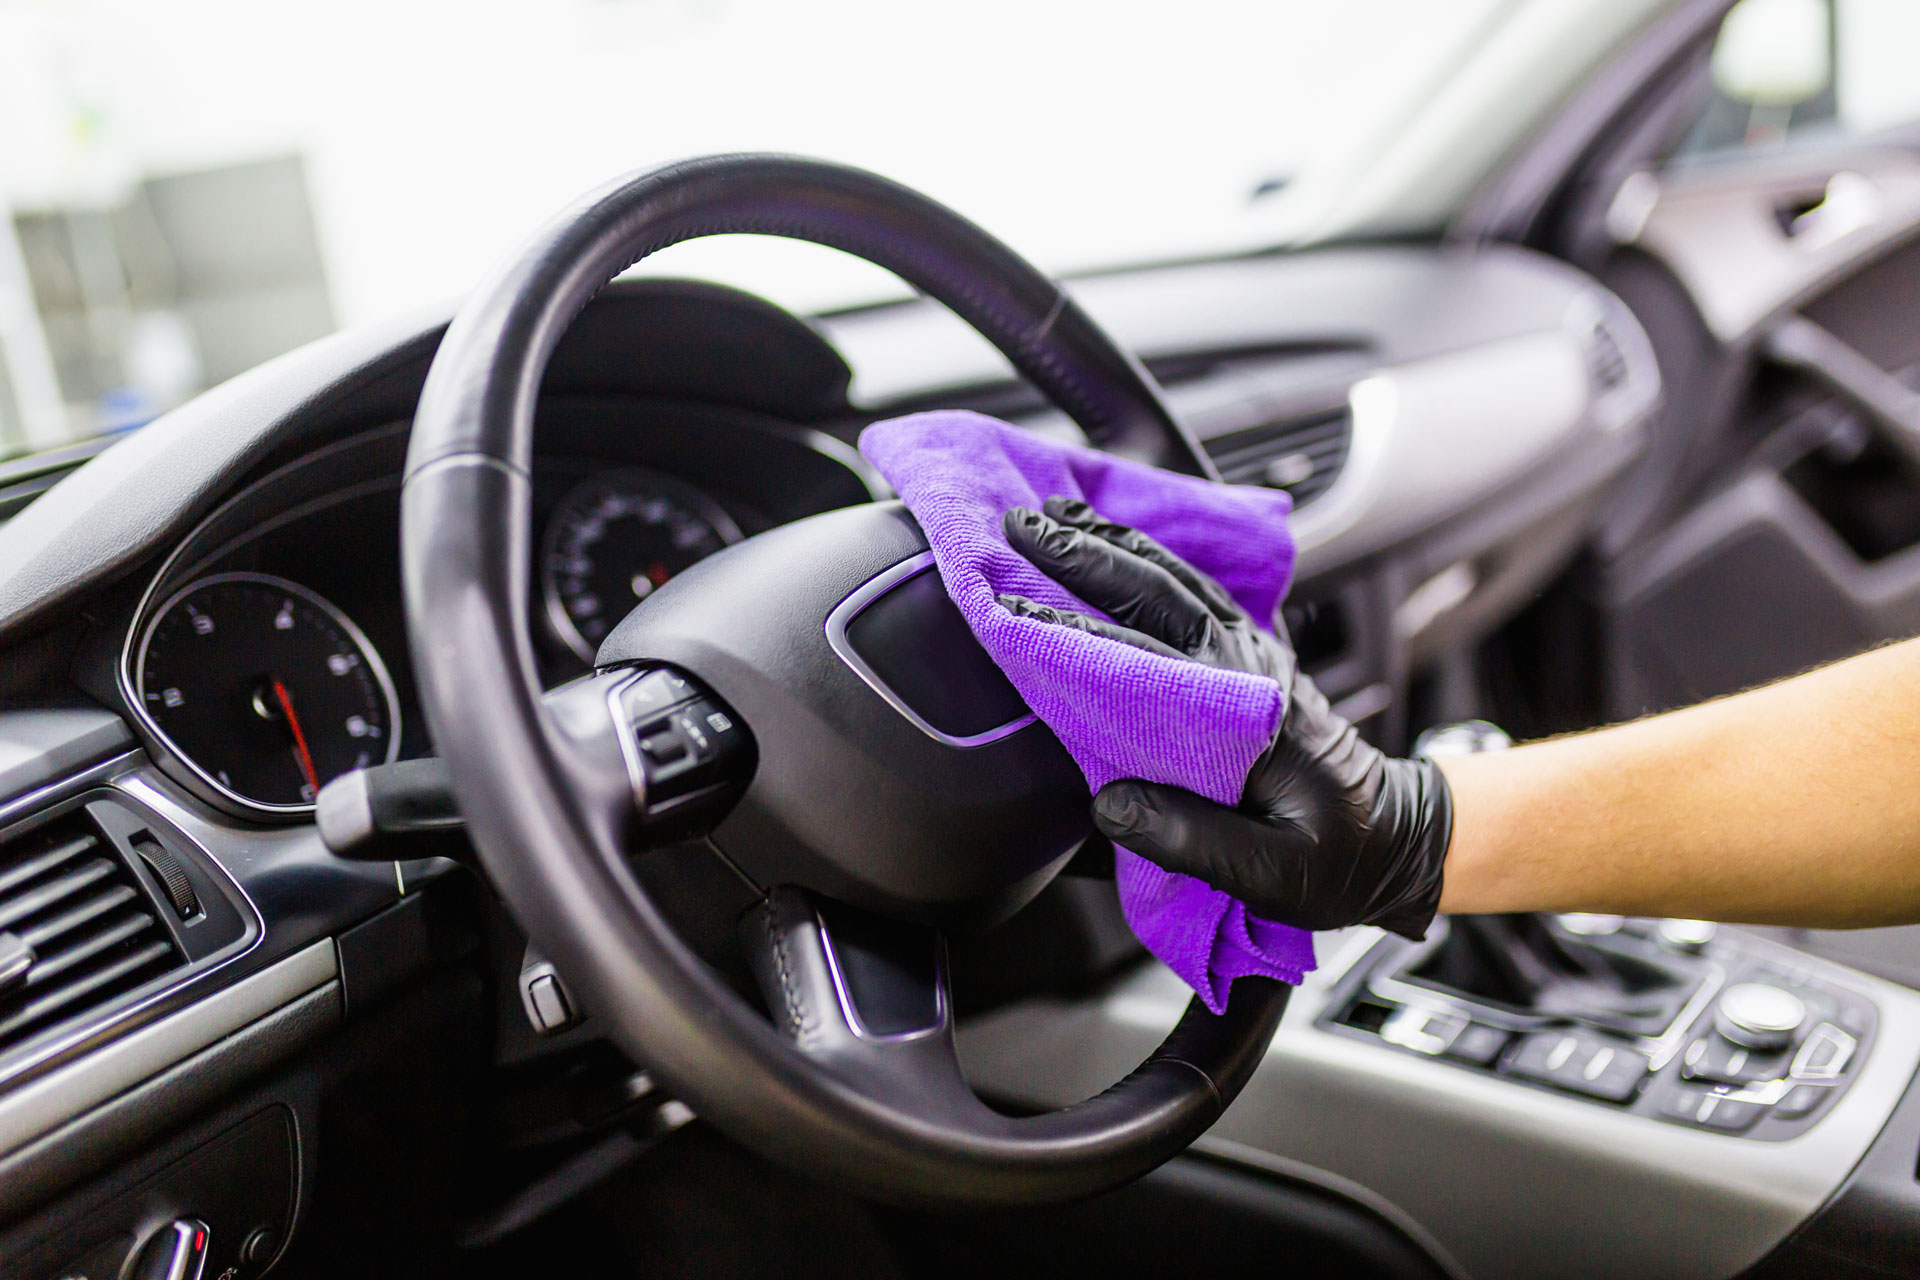 How To Properly Disinfect Your Vehicle Without Damaging The Interior